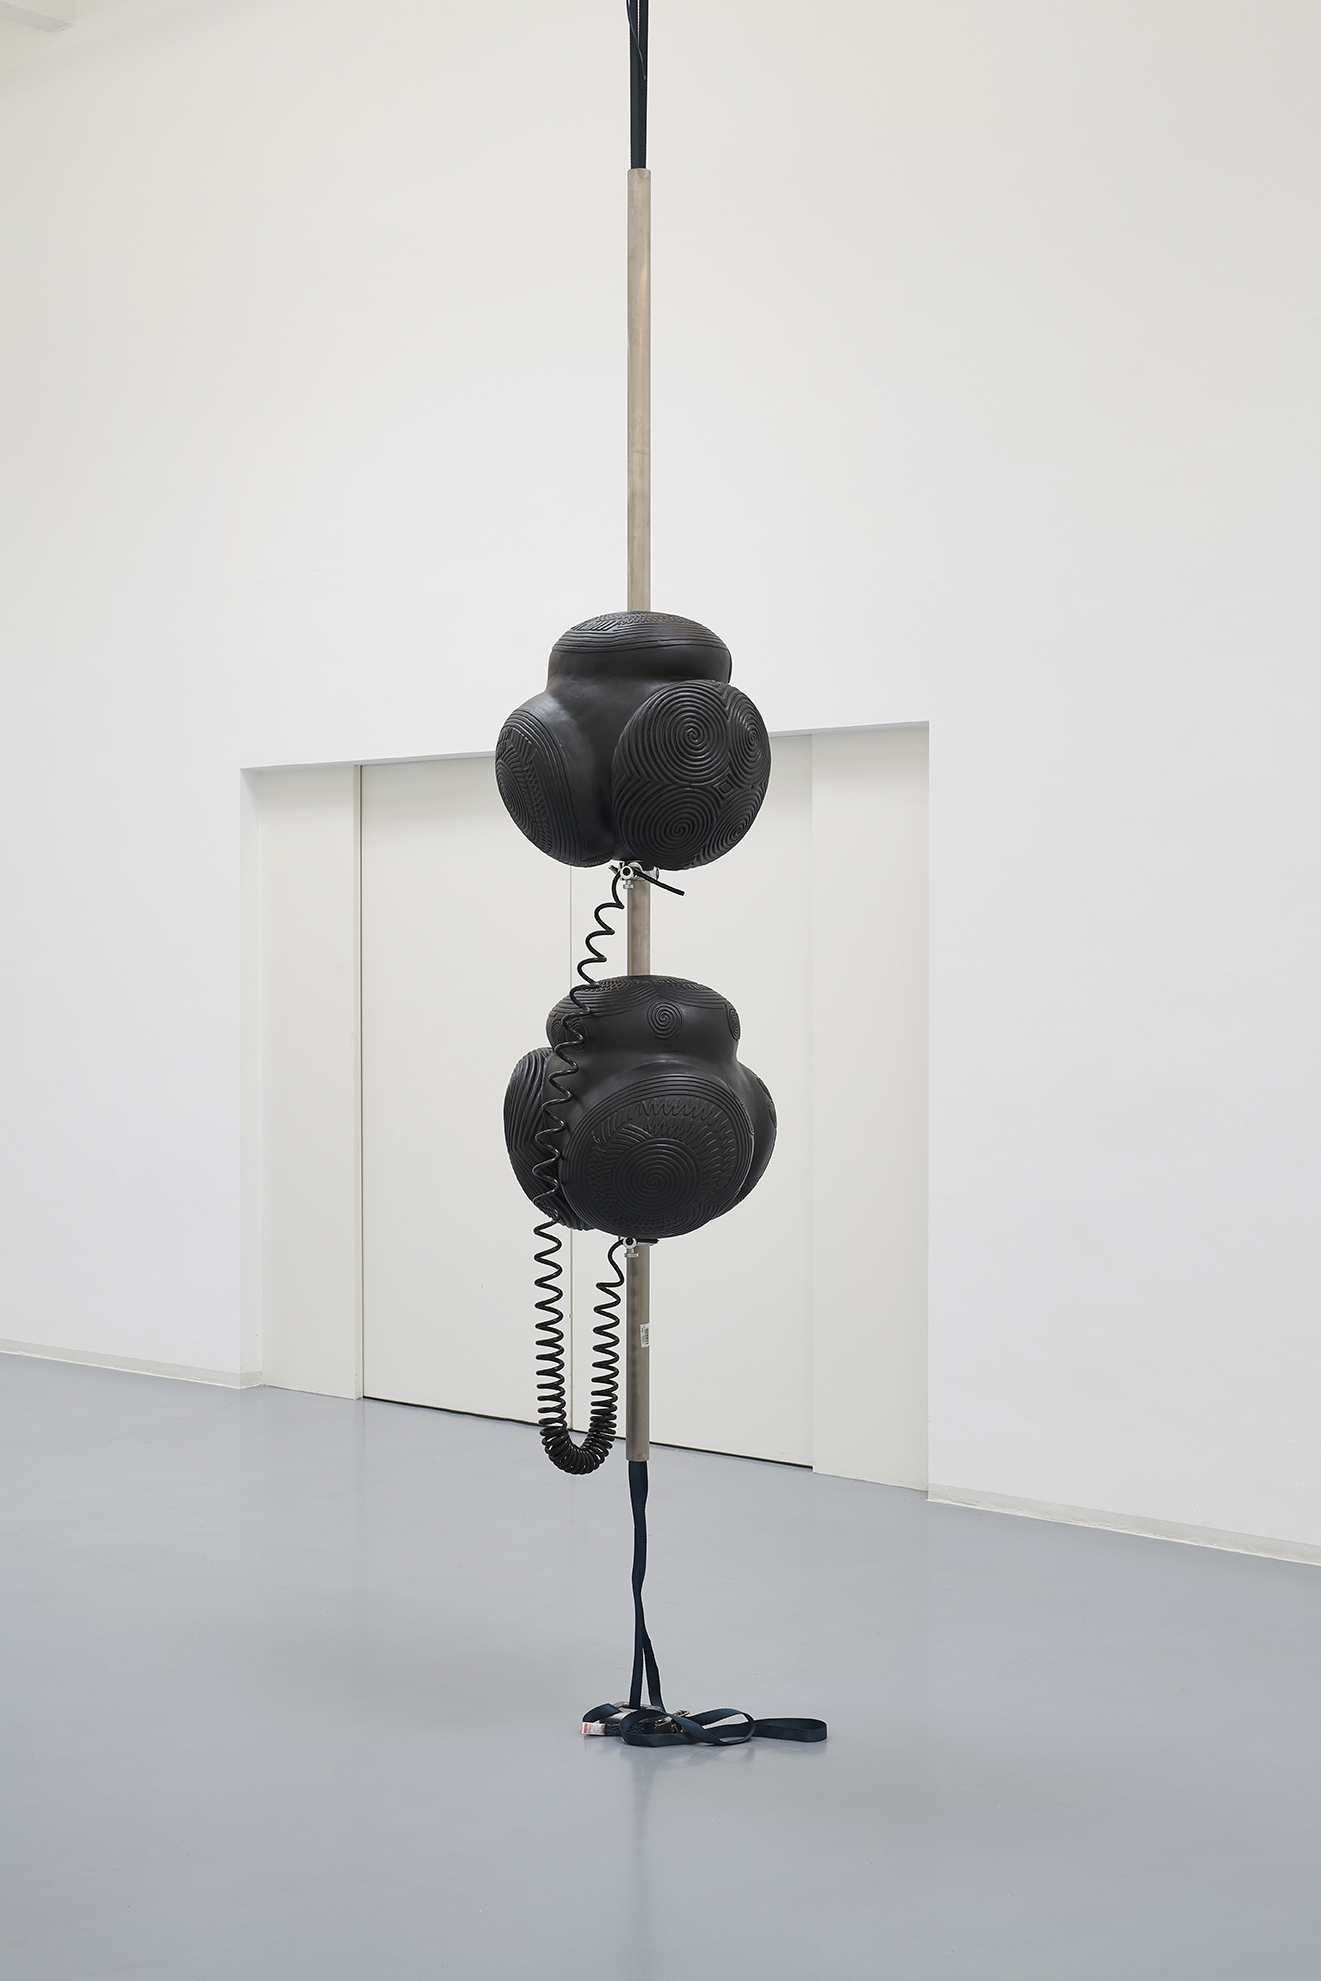 Guan Xiao, Things I Couldn’t Forget - Carved Stone Balls, Towie, Aberdeenshire, 2019